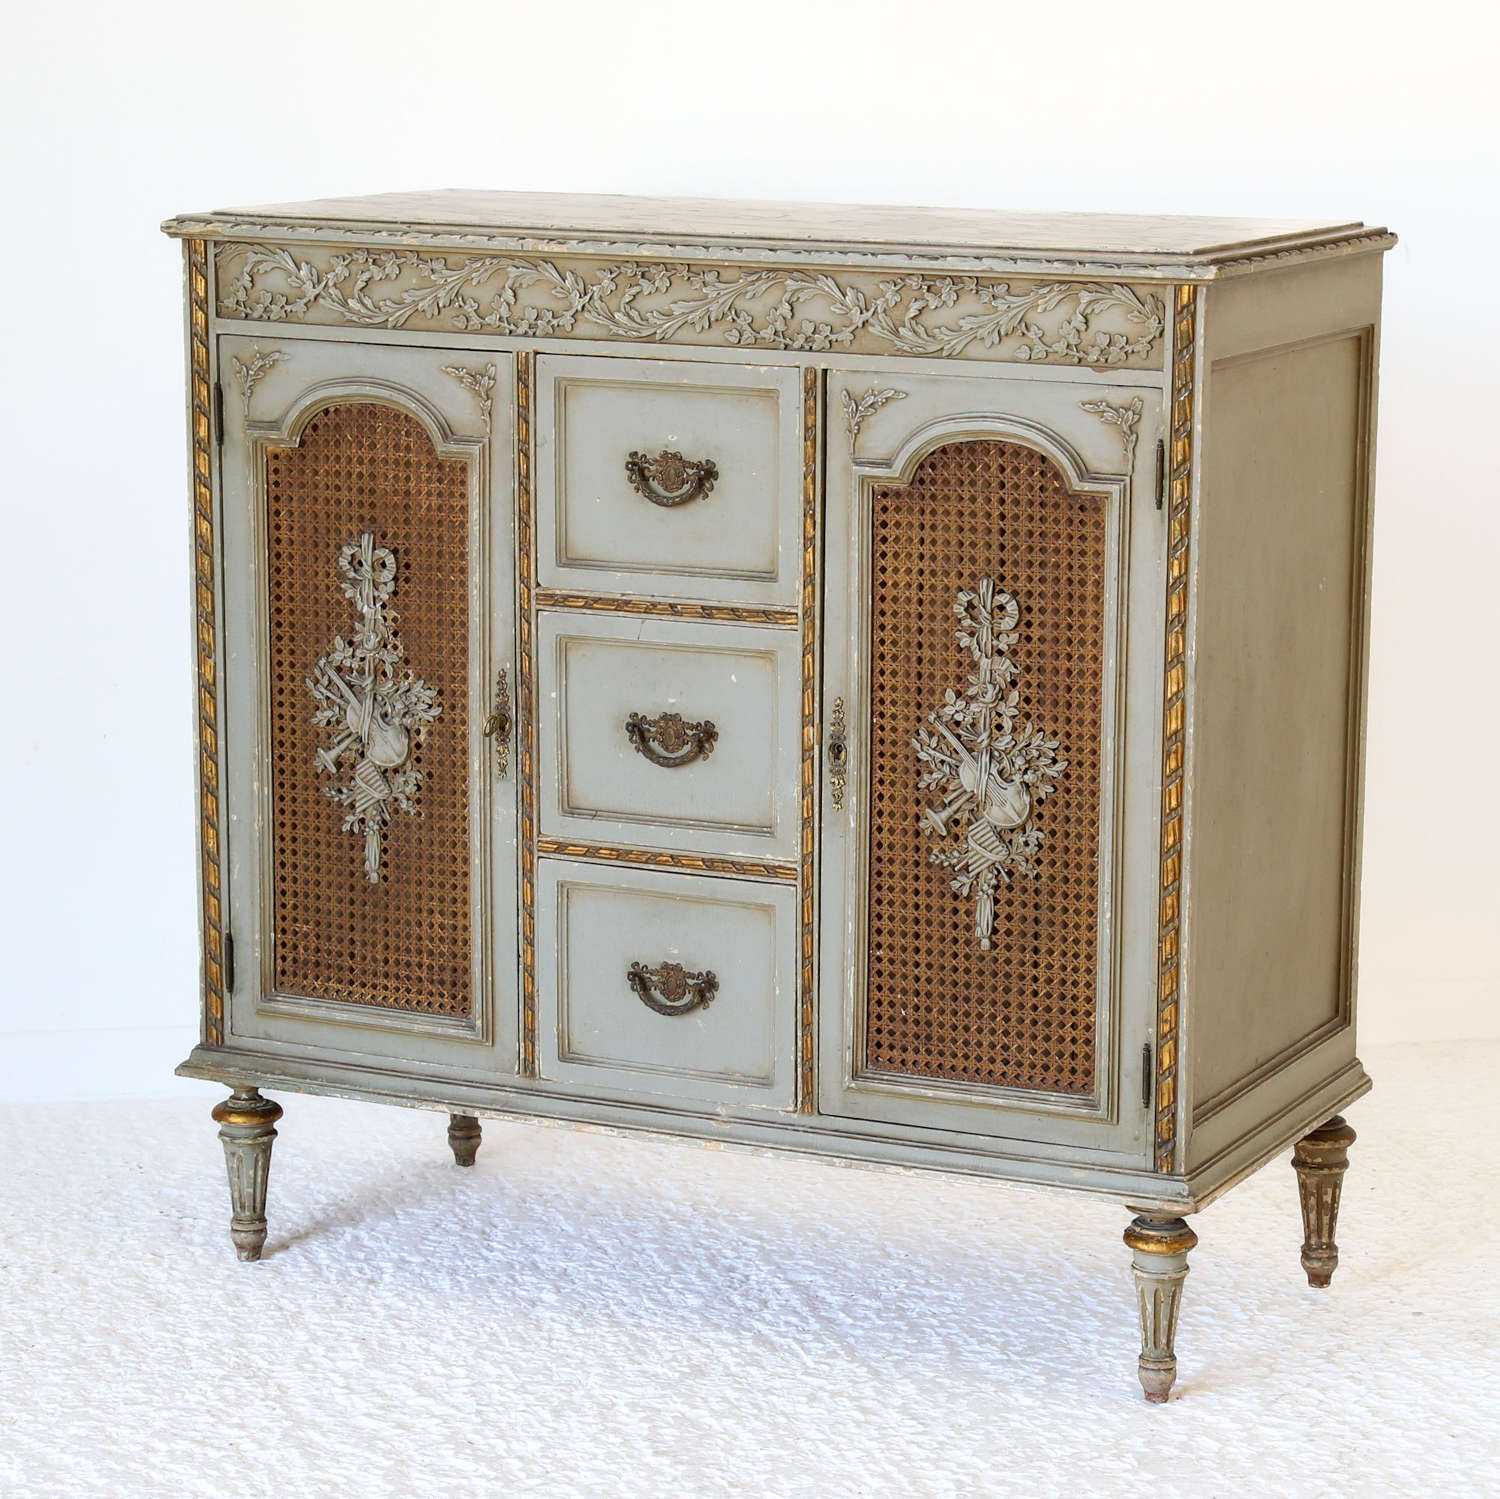 French Parisian Painted Side Cabinet (Original Condition)